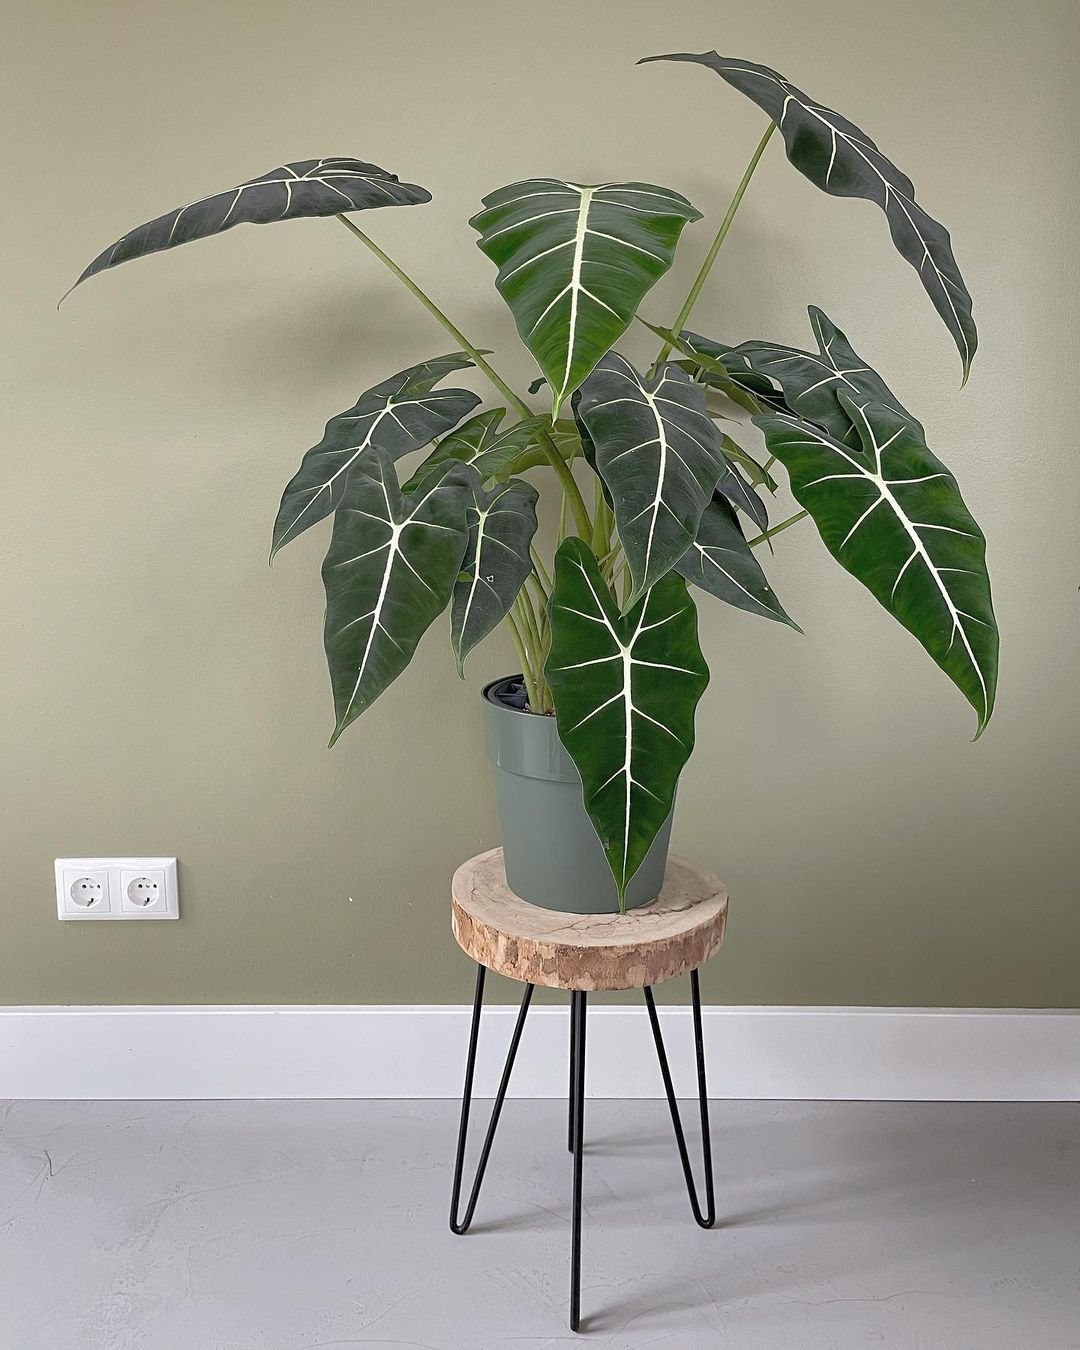 Alocasia Micholitziana Frydek: A striking plant with dark green, velvety leaves and prominent white veins.

